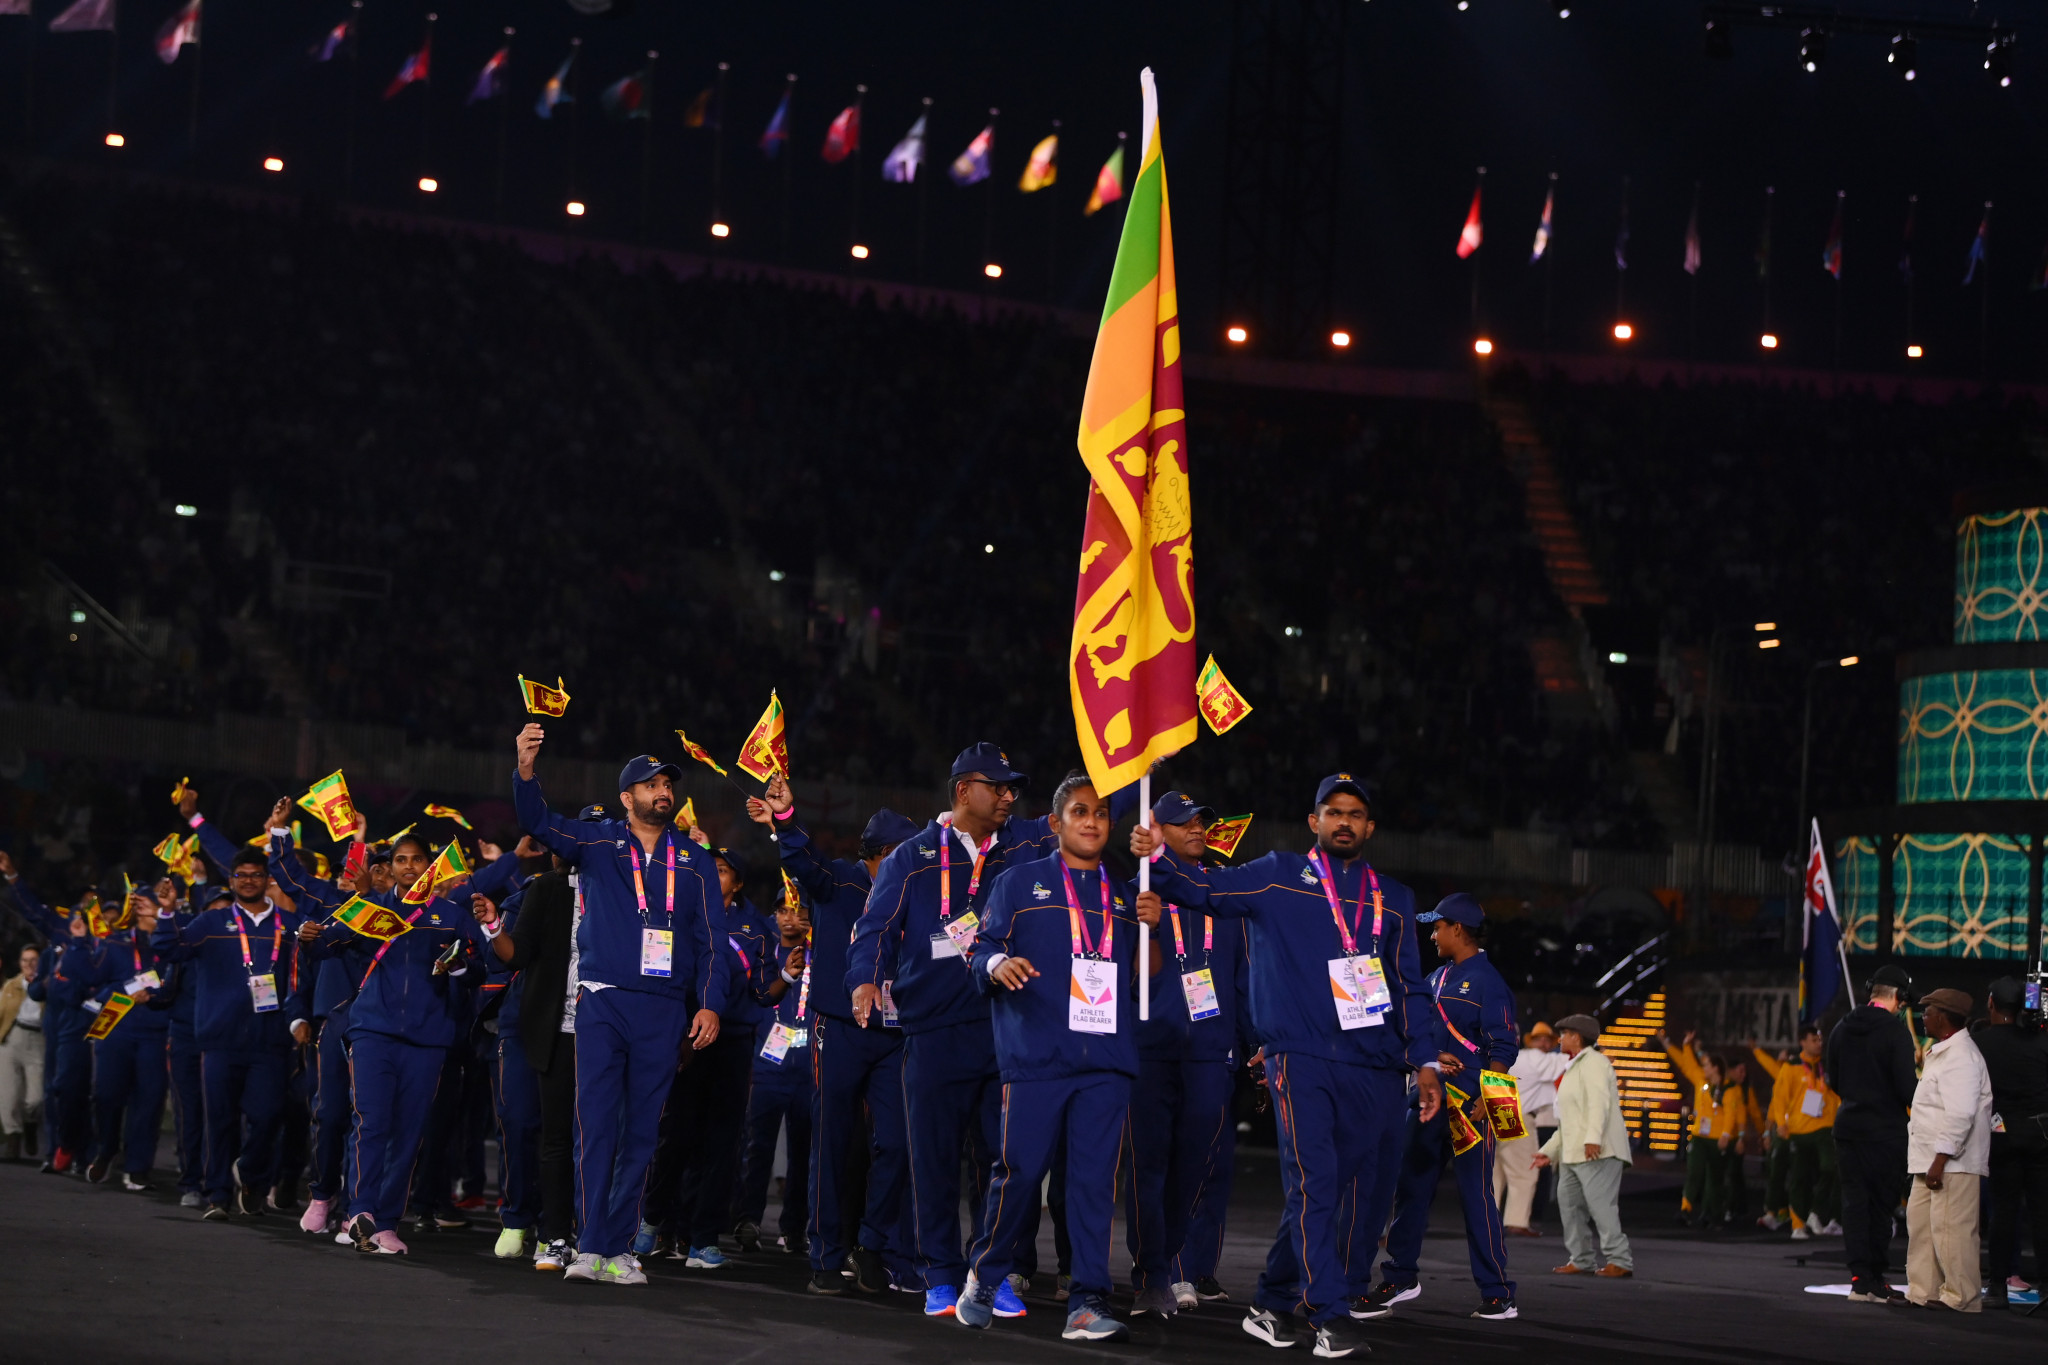 At least 10 Sri Lankans reported missing at Commonwealth Games